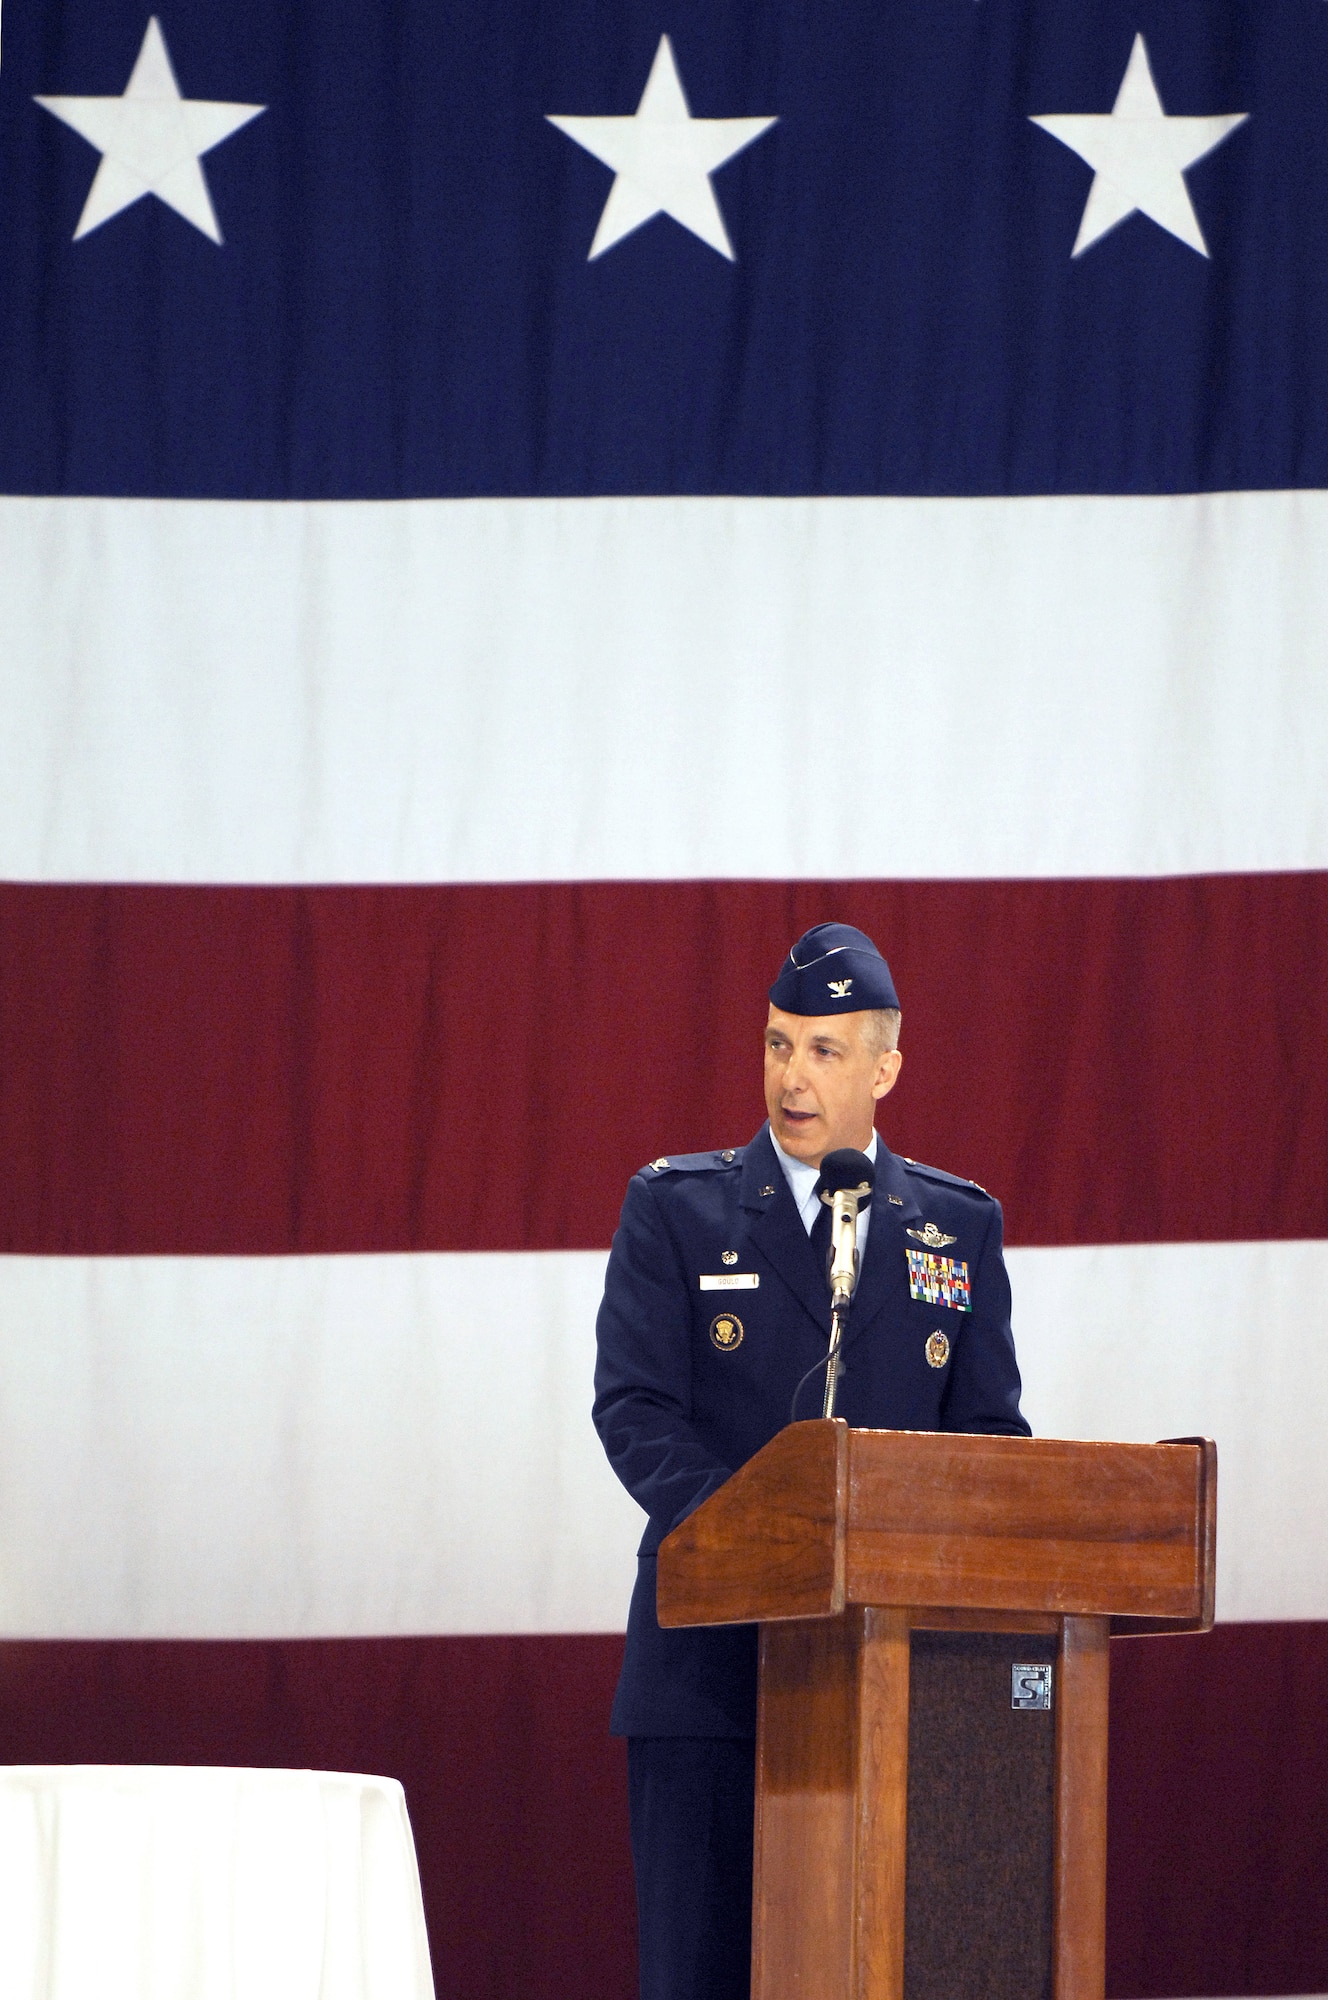 U.S. Air Force Col. Thomas F. Gould, 435th Air Base Wing commander, addresses the crowd during the 435th Air Base Wing Change of Command ceremony in Hangar one, Ramstein Air Base, Germany, June 11, 2009. (U.S. Air Force photo by Senior Airman Amber Bressler)
